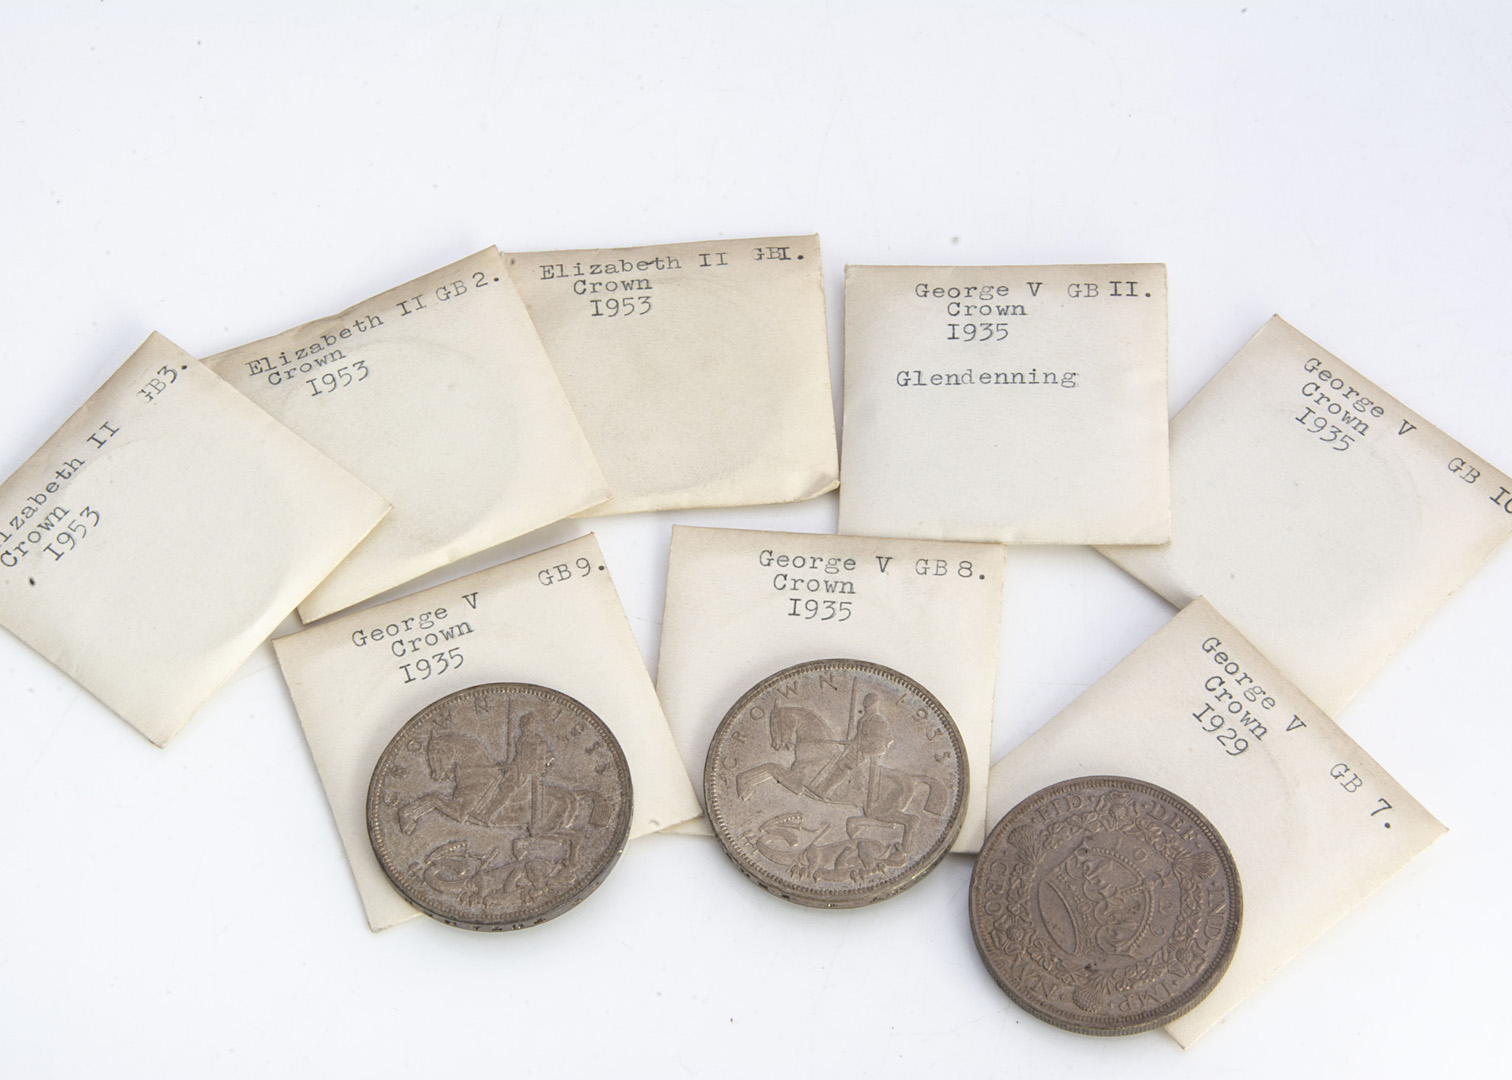 Five George V crowns, including a 1929, EF, and four from 1935, EF, along with three 1953 crowns (